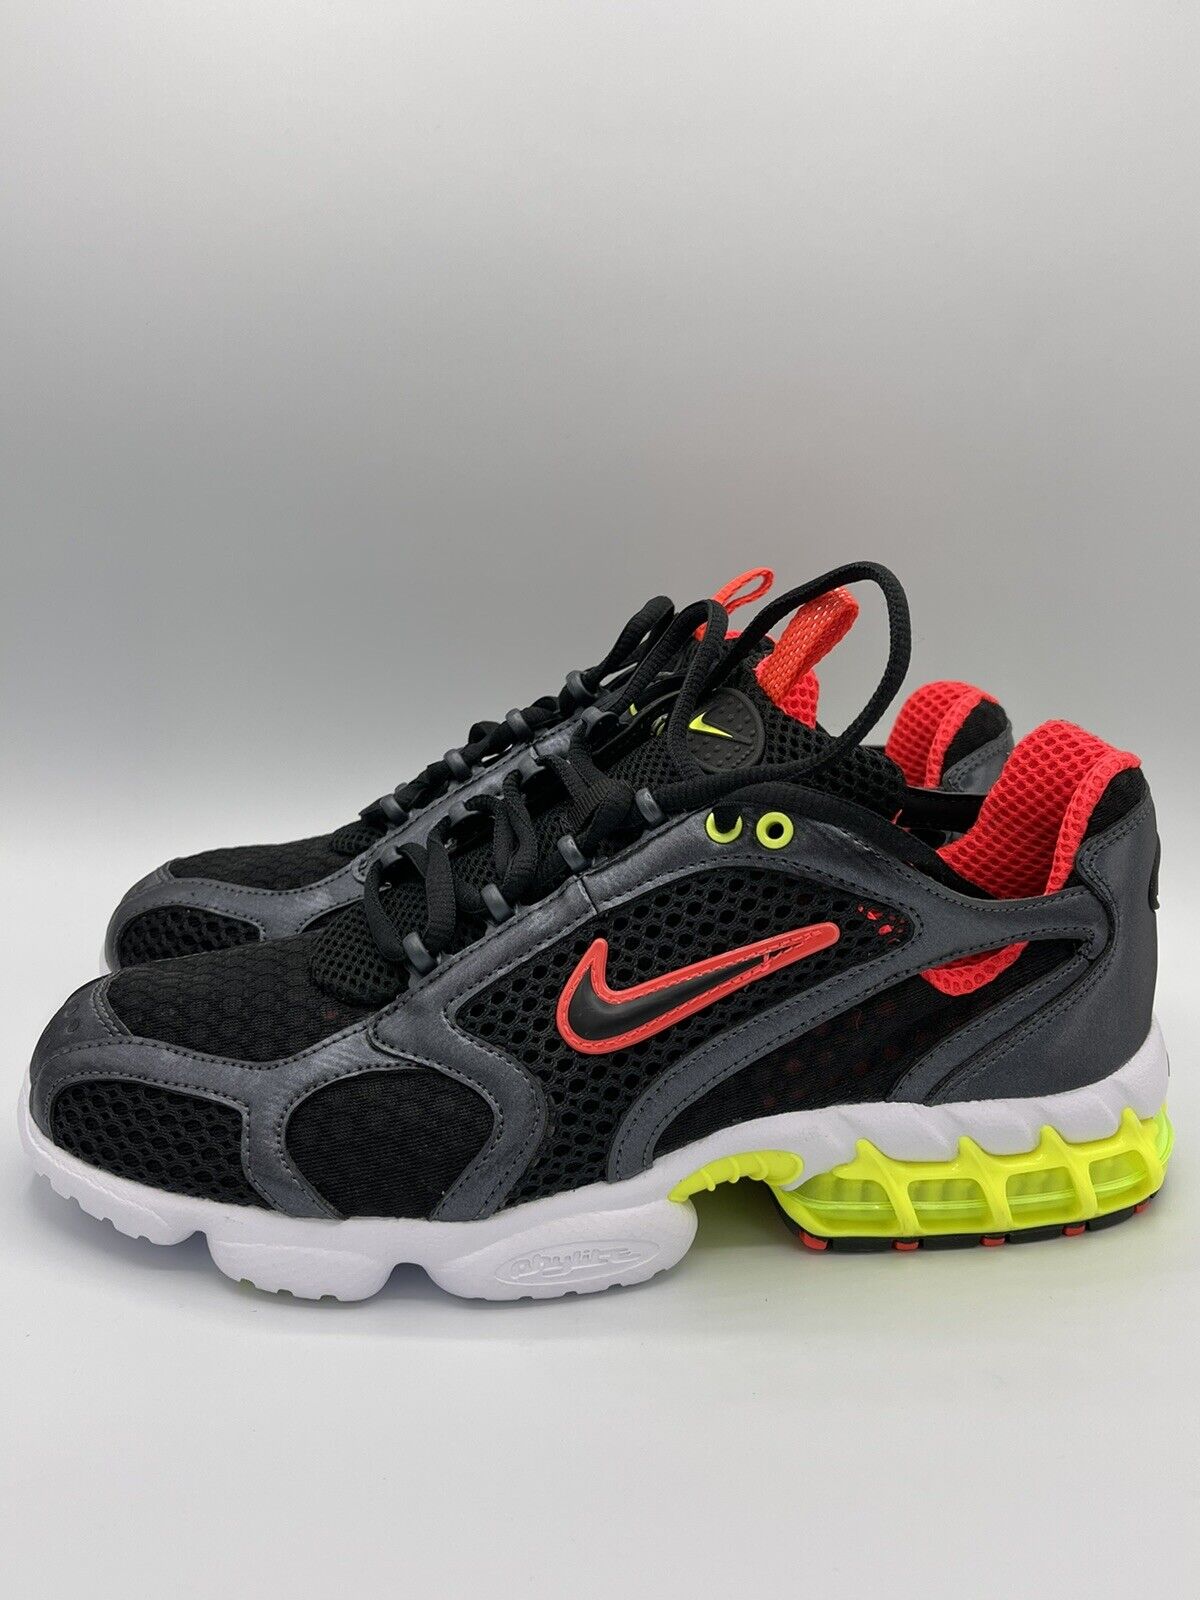 Nike Air Zoom Spiridon Cage 2 Black Volt Red Shoes Casual Sneakers Women’s  Size